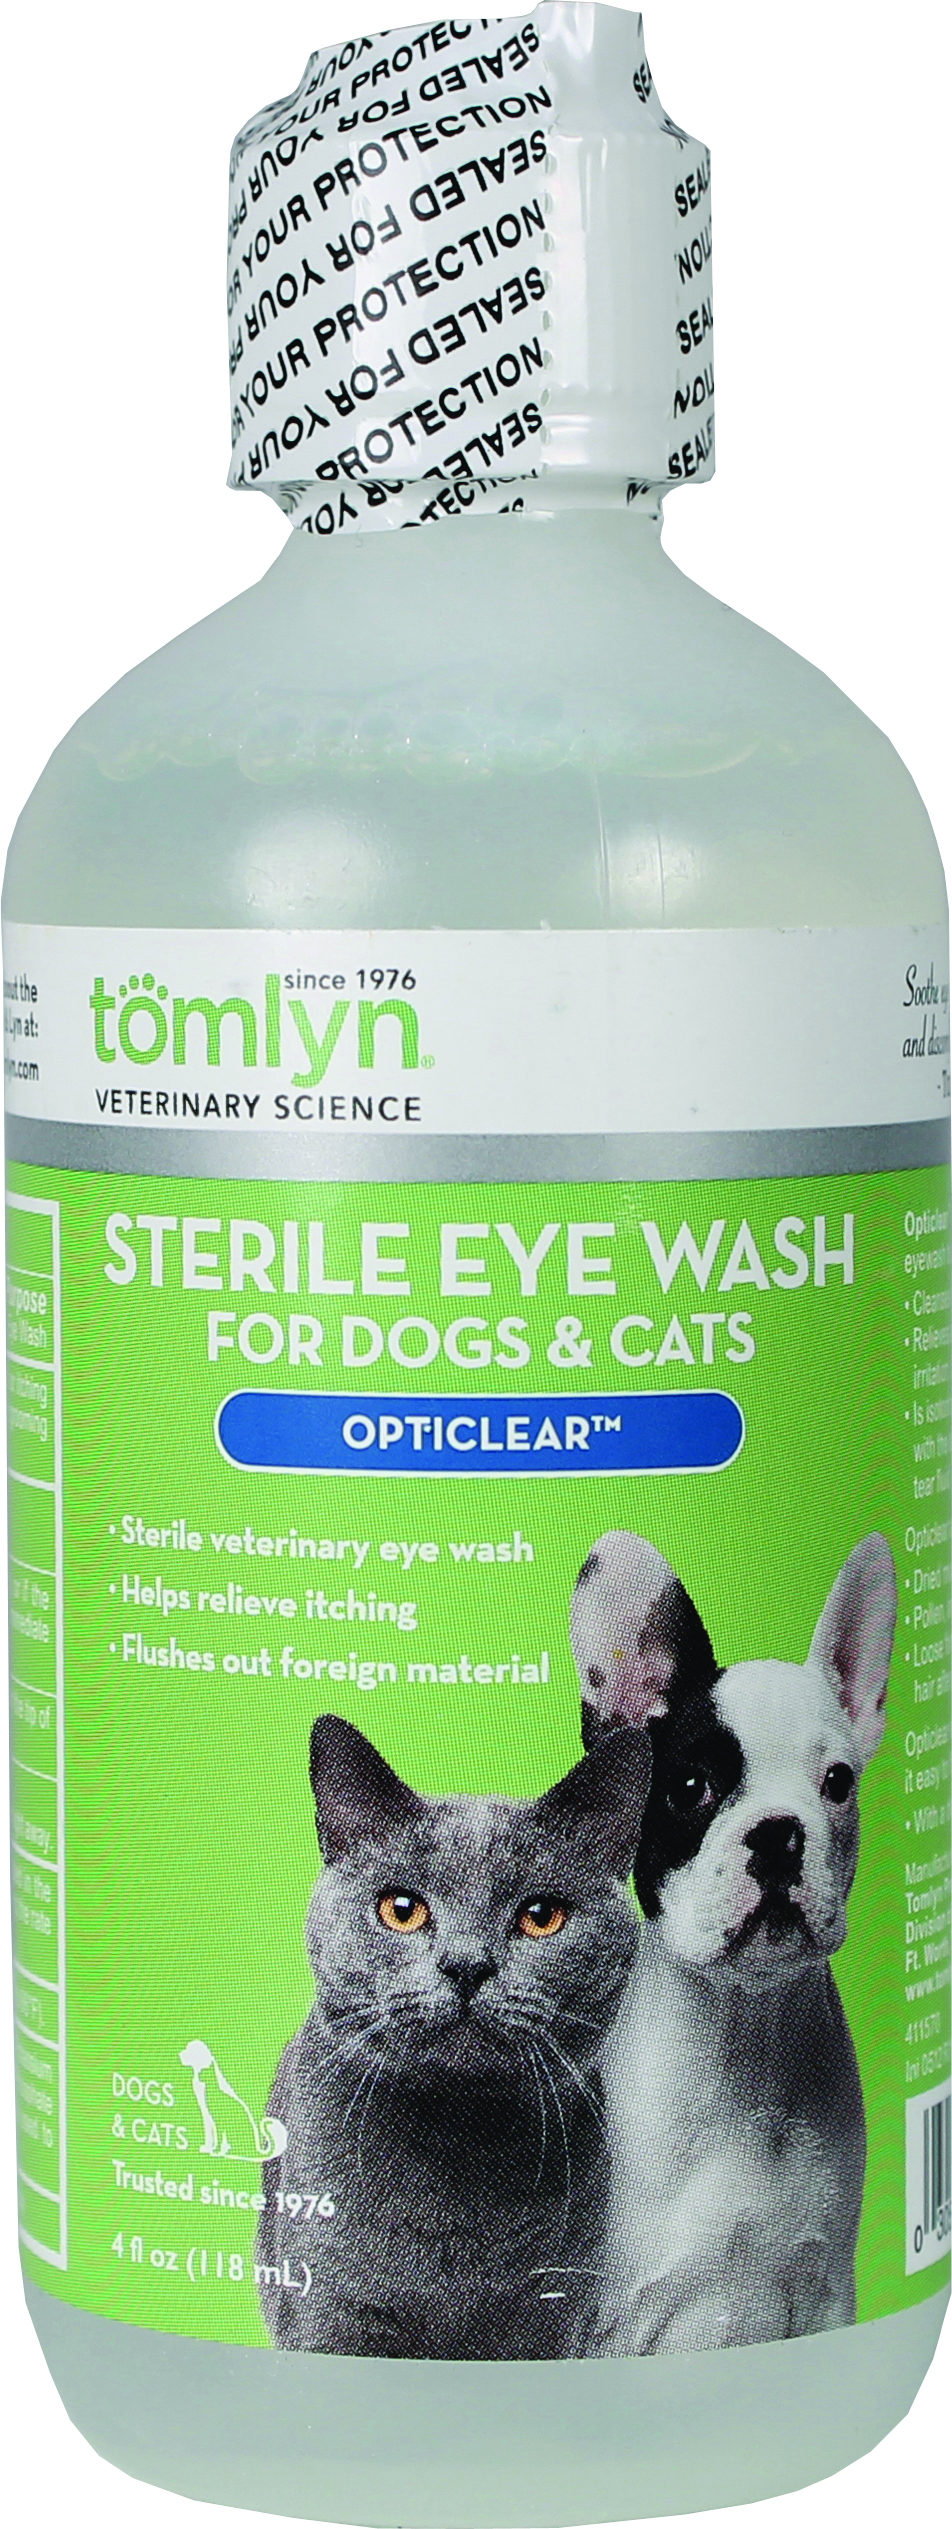 OPTICLEAR STERILE EYE WASH FOR DOGS AND CATS